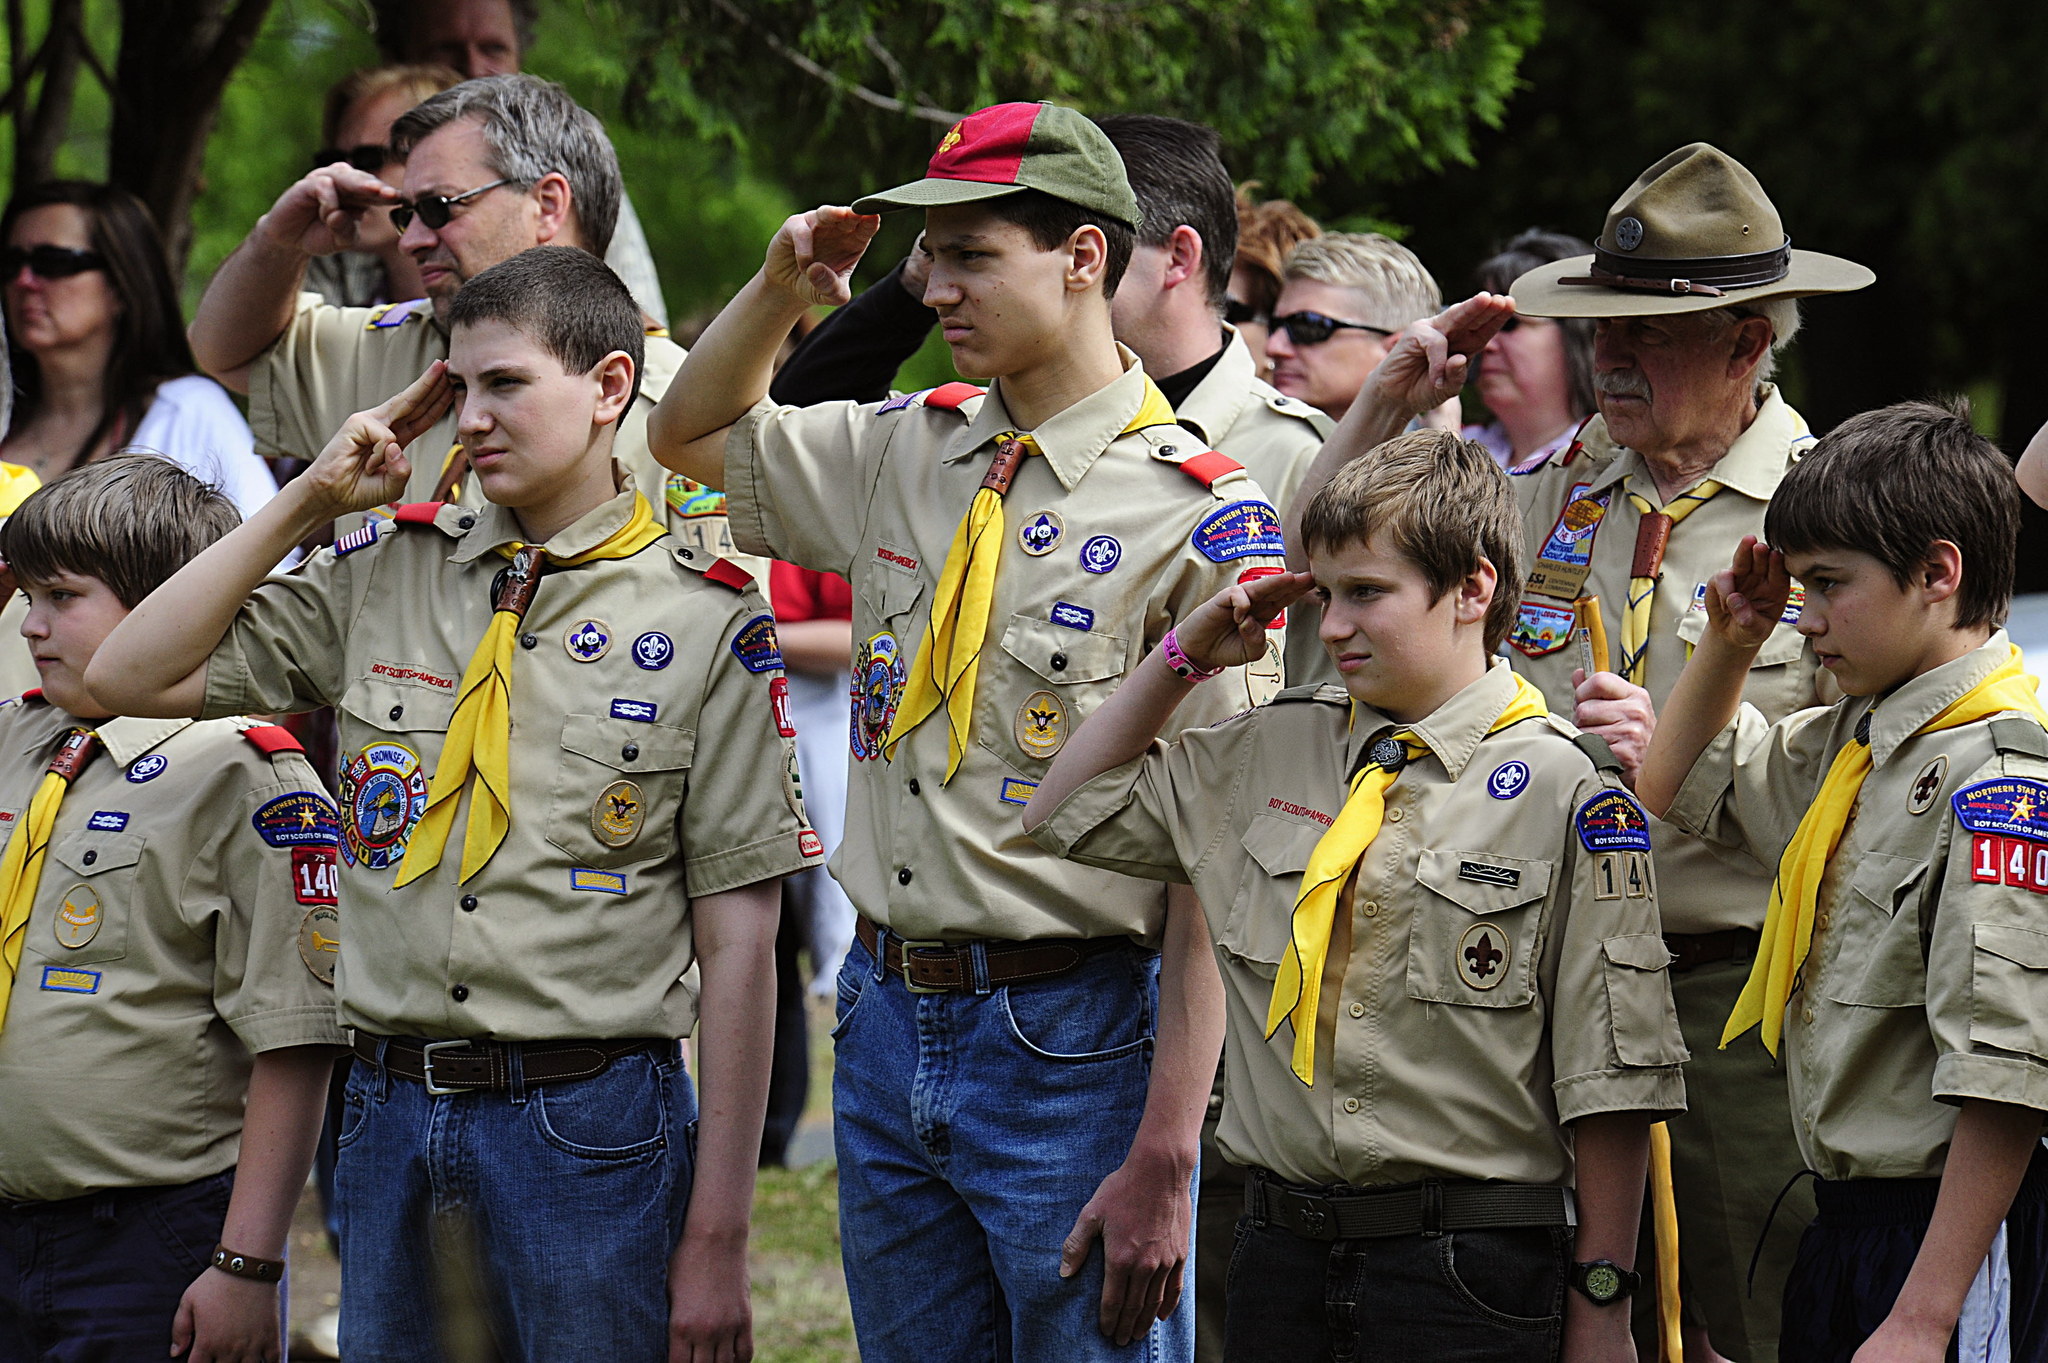 morris-girls-in-the-boys-scouts-an-eagle-scout-s-perspective-the